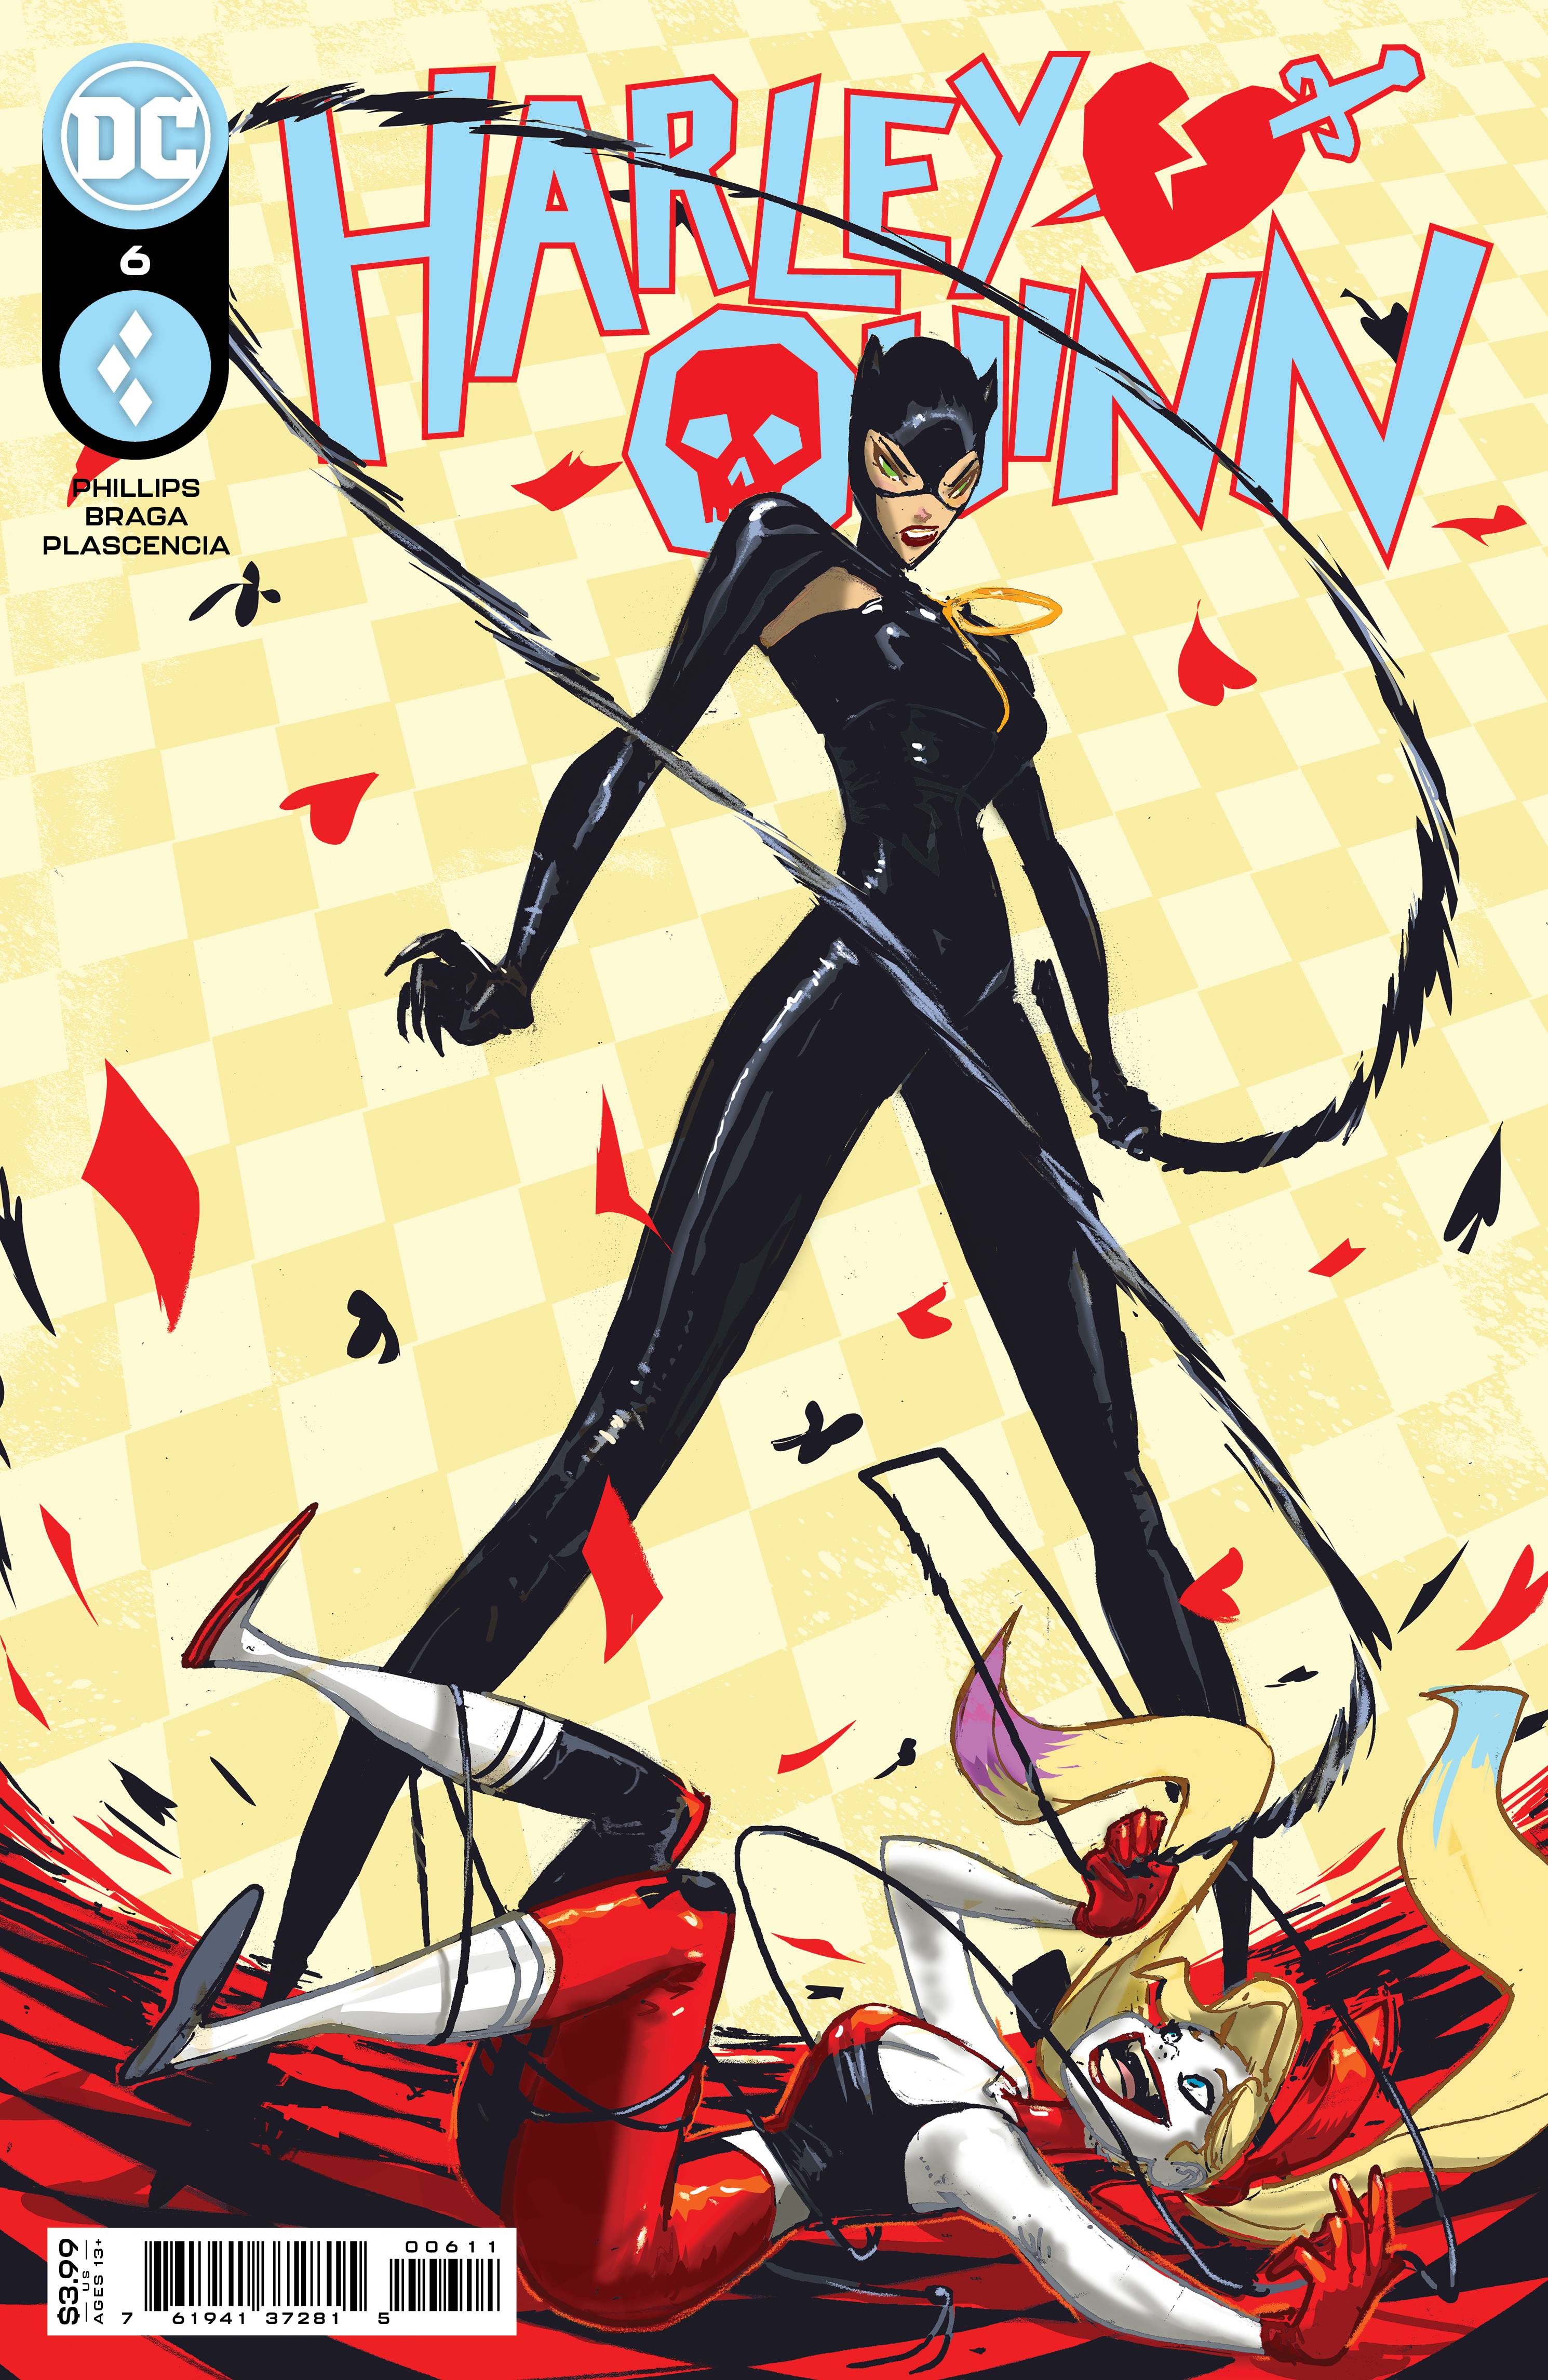 HARLEY QUINN #6 CVR A | Game Master's Emporium (The New GME)